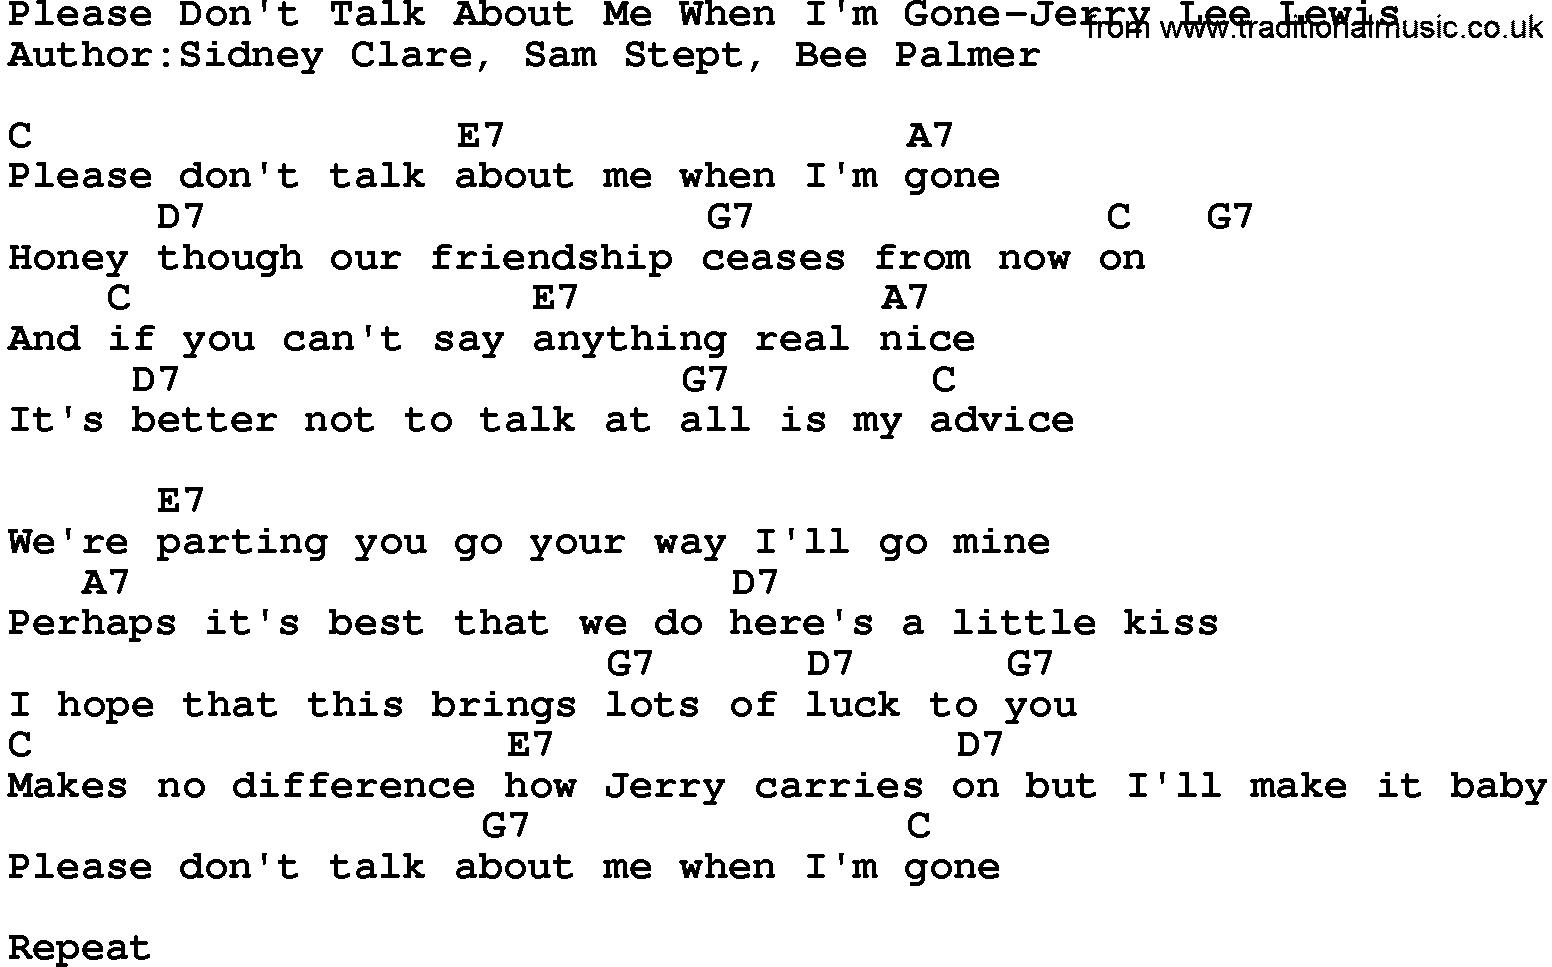 Country music song: Please Don't Talk About Me When I'm Gone-Jerry Lee Lewis lyrics and chords